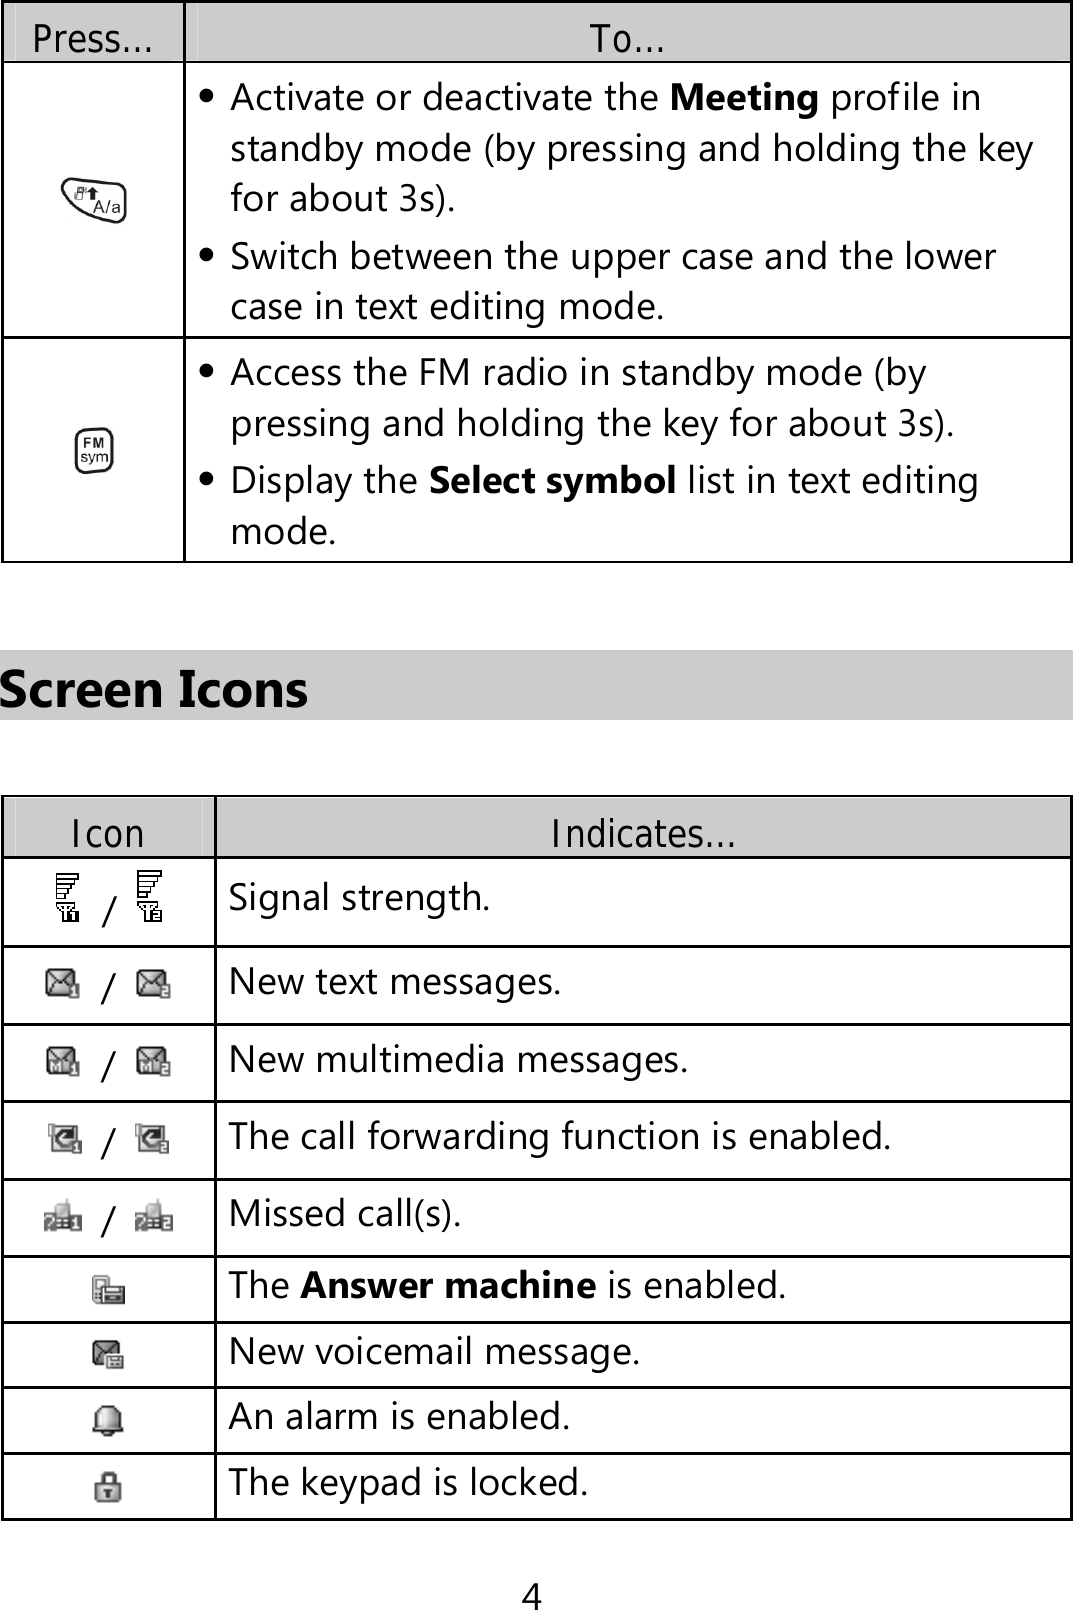 4 Press… To…  Activate or deactivate the Meeting profile in standby mode (by pressing and holding the key for about 3s).  Switch between the upper case and the lower case in text editing mode.   Access the FM radio in standby mode (by pressing and holding the key for about 3s).  Display the Select symbol list in text editing mode.  Screen Icons  Icon  Indicates… /   Signal strength.  /   New text messages.    /   New multimedia messages.  /   The call forwarding function is enabled.  /   Missed call(s).  The Answer machine is enabled. New voicemail message. An alarm is enabled. The keypad is locked. 